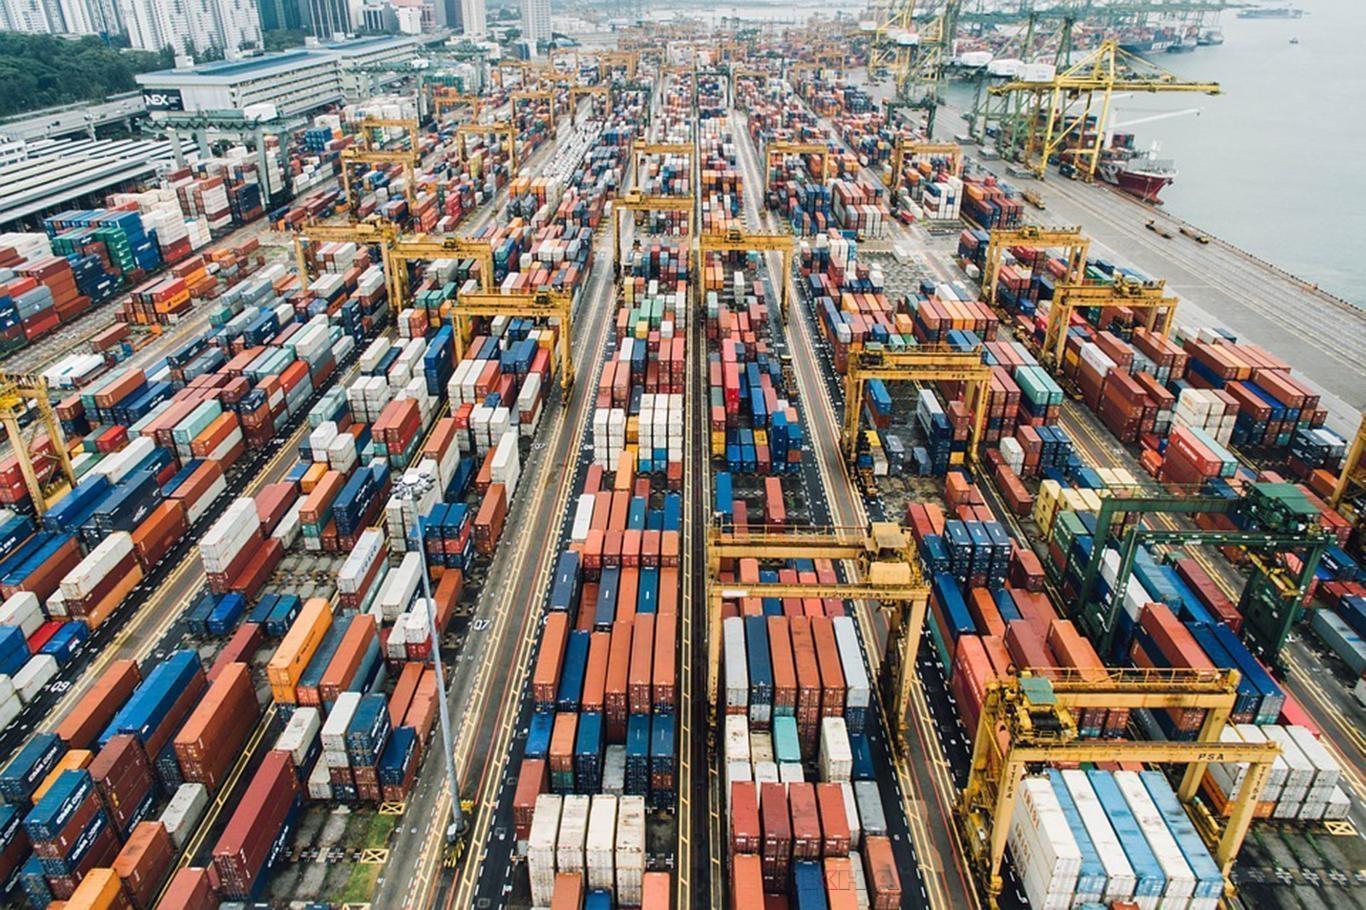 Turkey’s exports decrease by 41.4% in April 2020